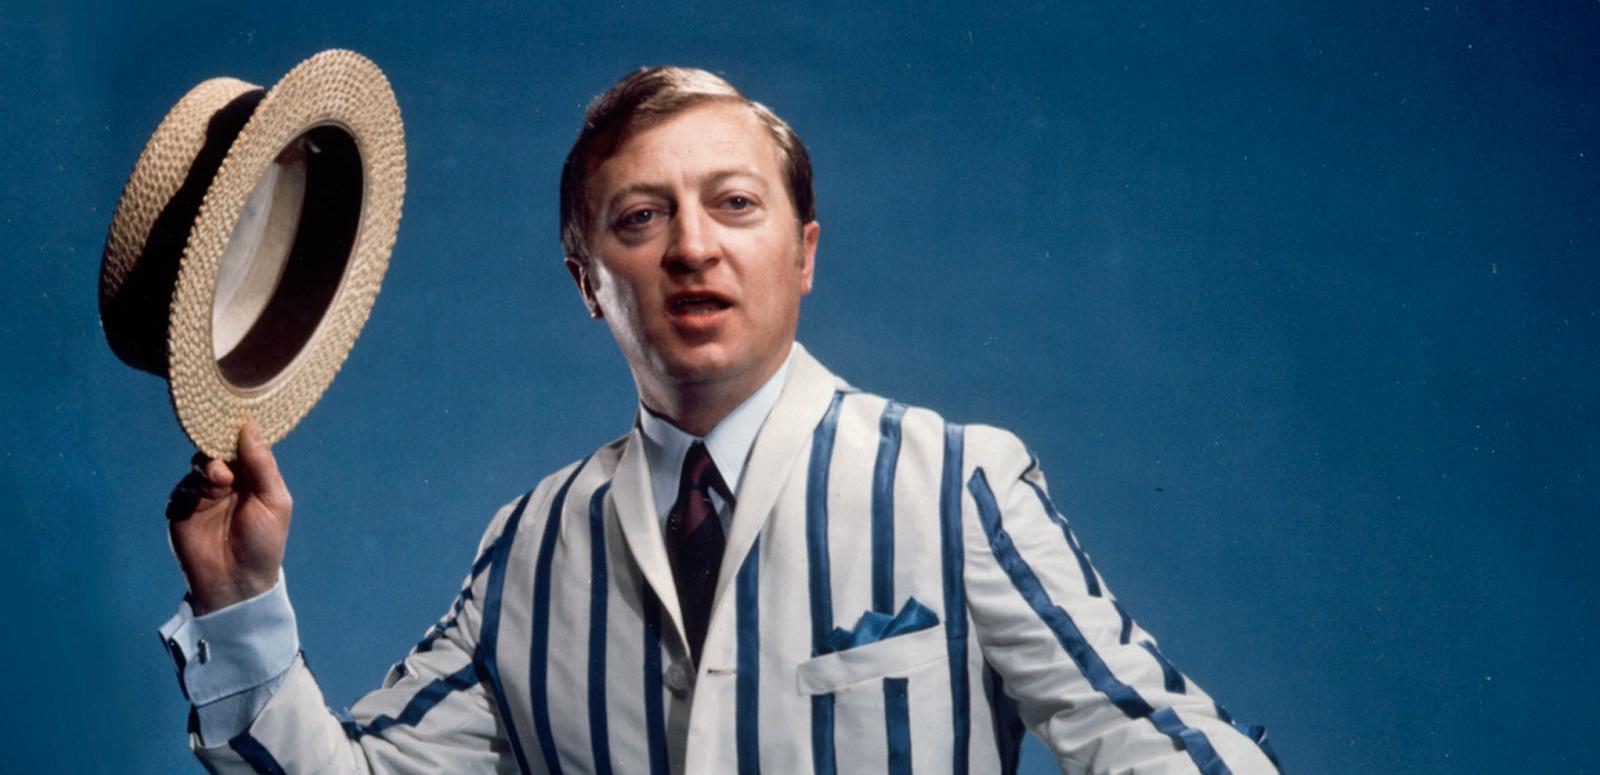 Graham Kennedy wearing a striped jacket and holding a straw boater hat in a promo shot for GTV 9.